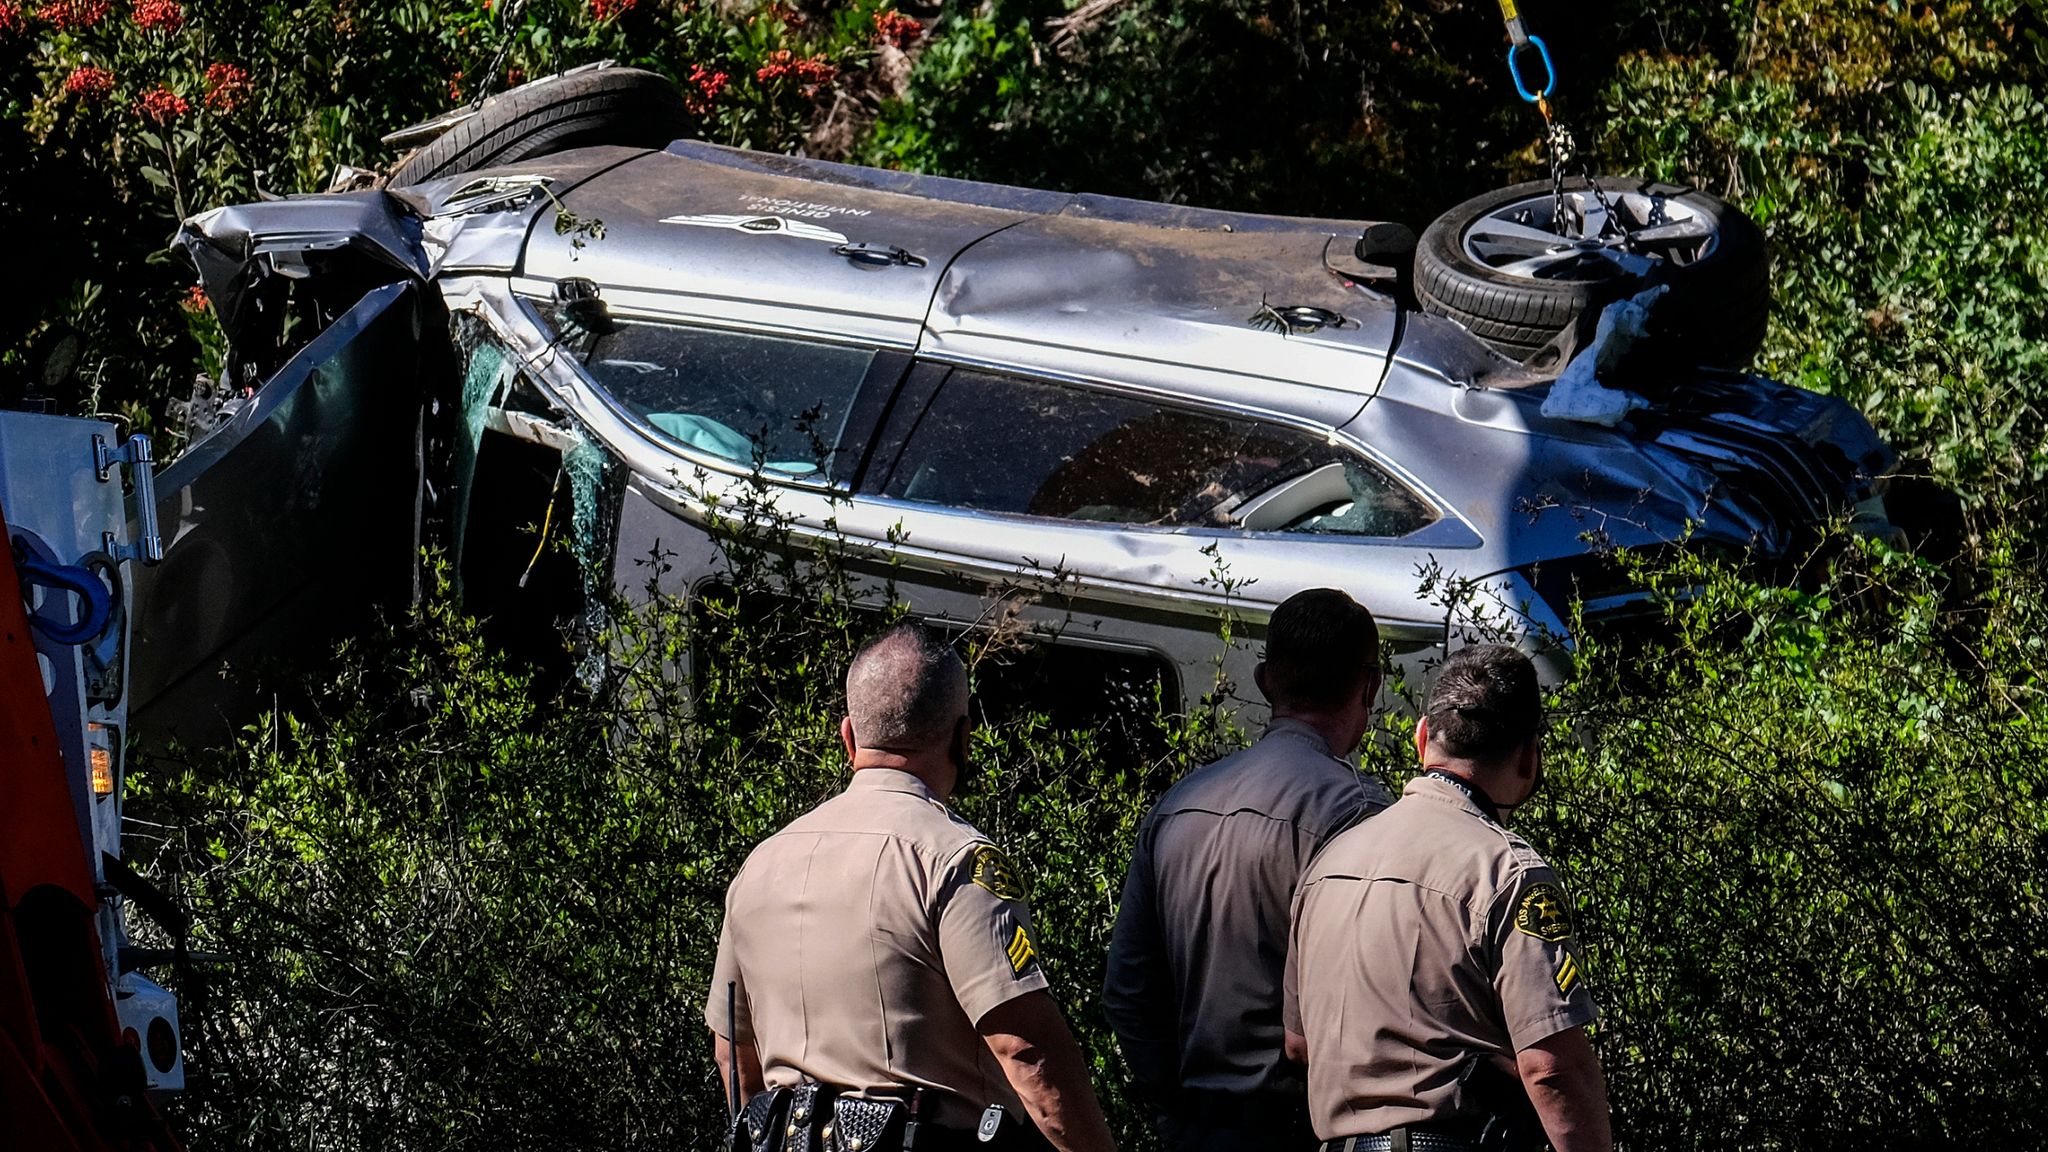 Tiger Woods Car Crash Woods Not Expected To Face Any Criminal Charges Says La Sheriff Golf News Sky Sports